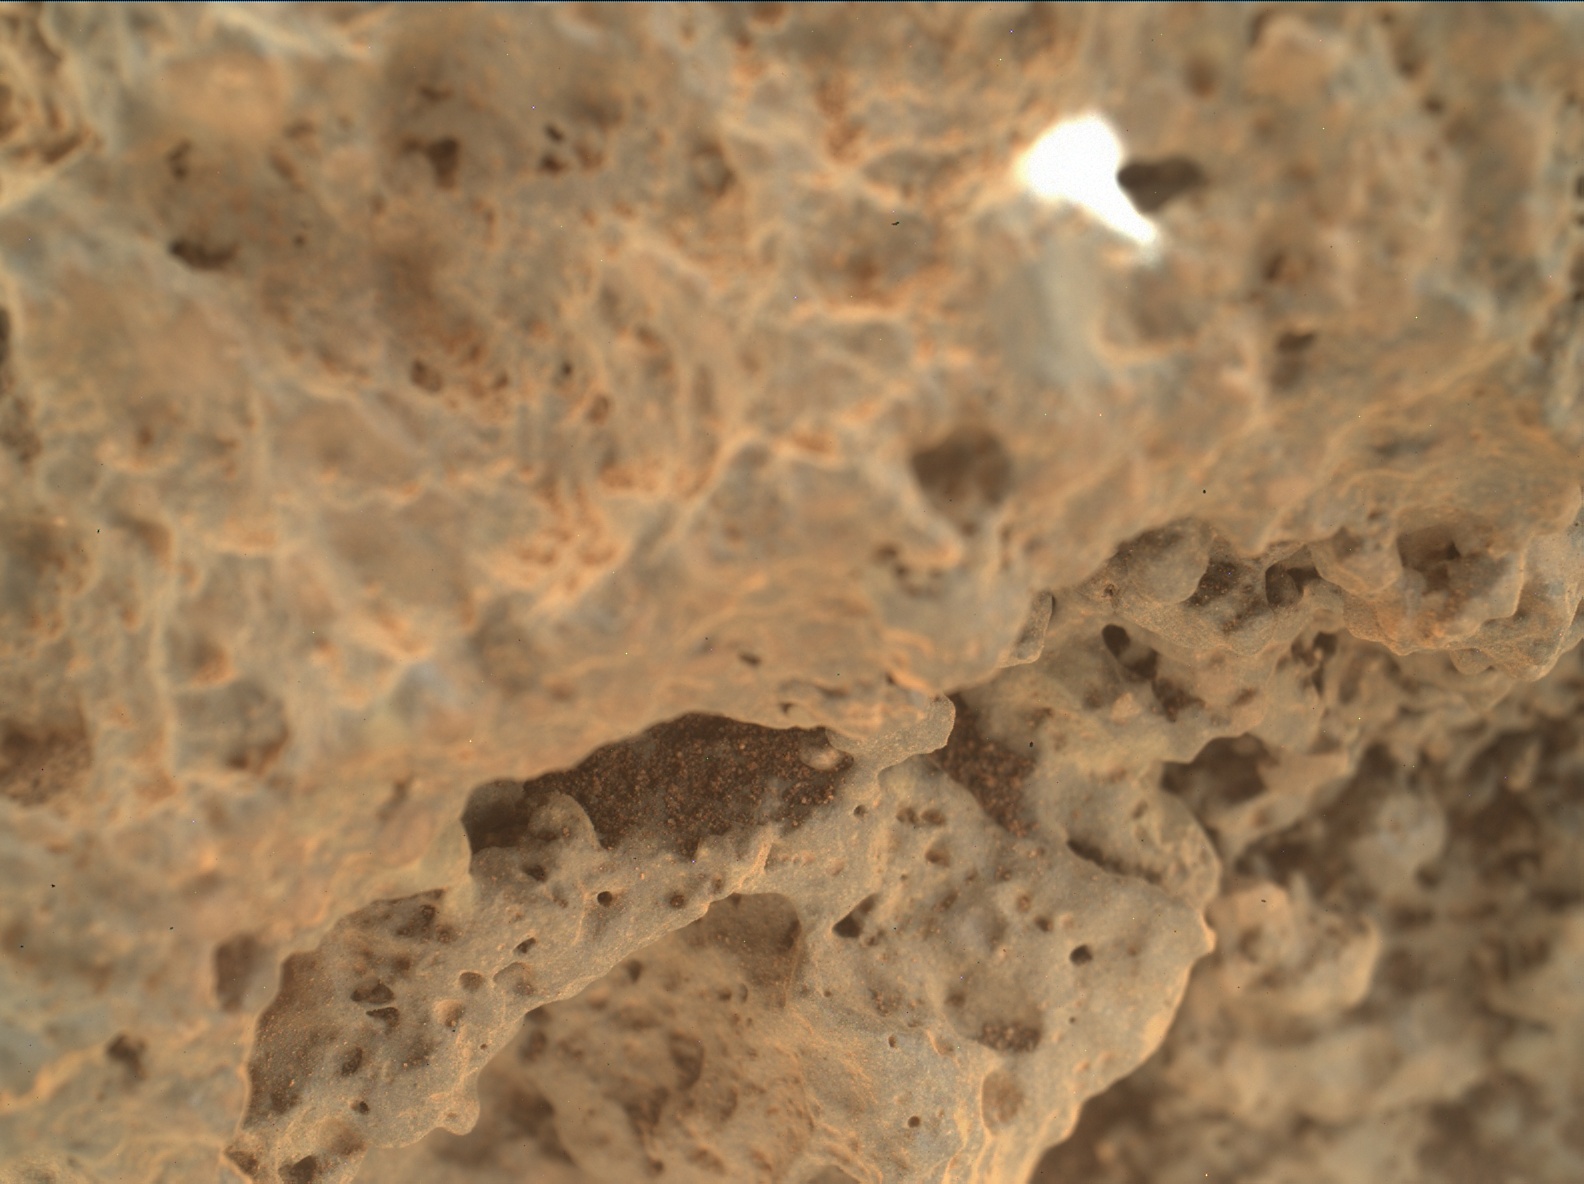 Nasa's Mars rover Curiosity acquired this image using its Mars Hand Lens Imager (MAHLI) on Sol 550